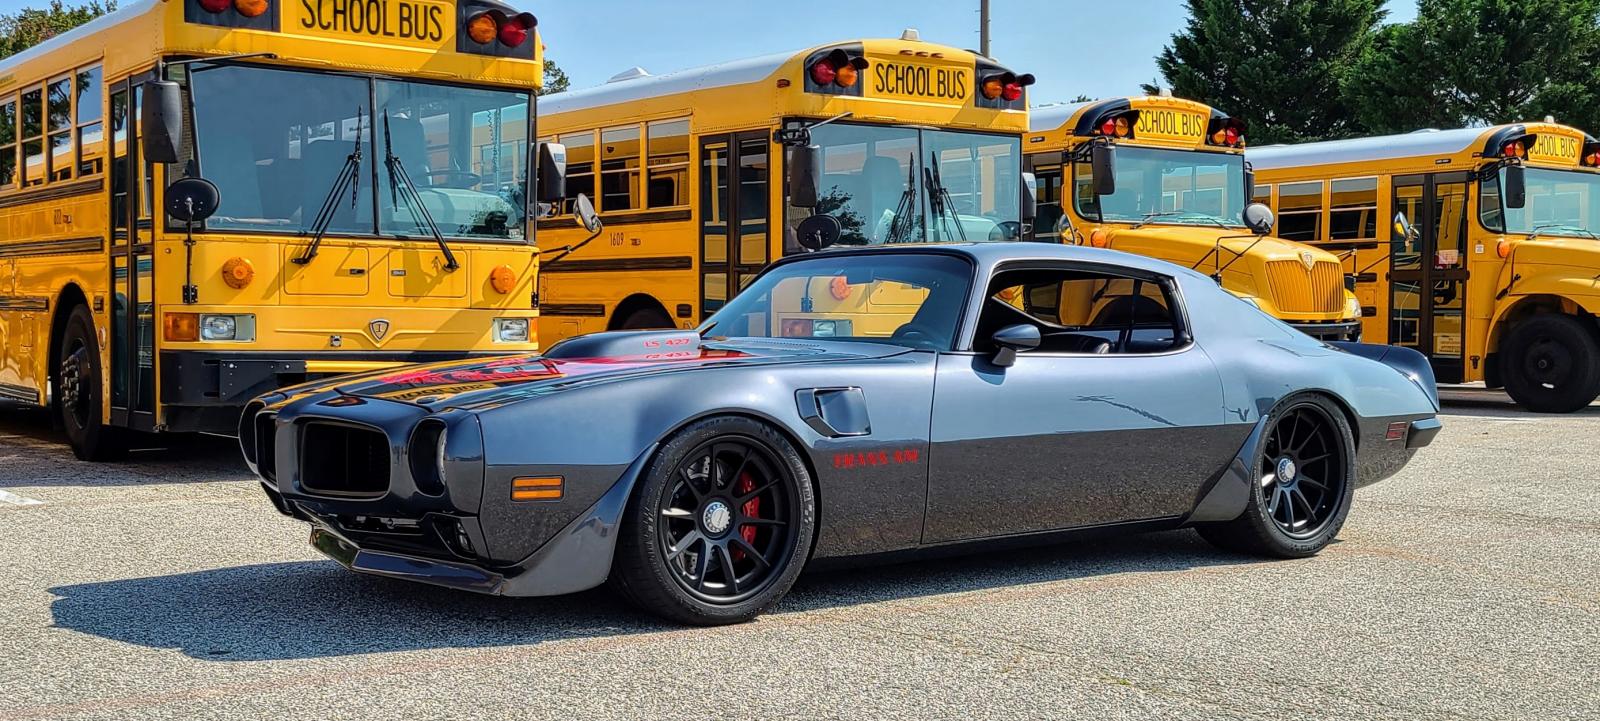 Name:  trans am and buses.jpg
Views: 808
Size:  272.8 KB